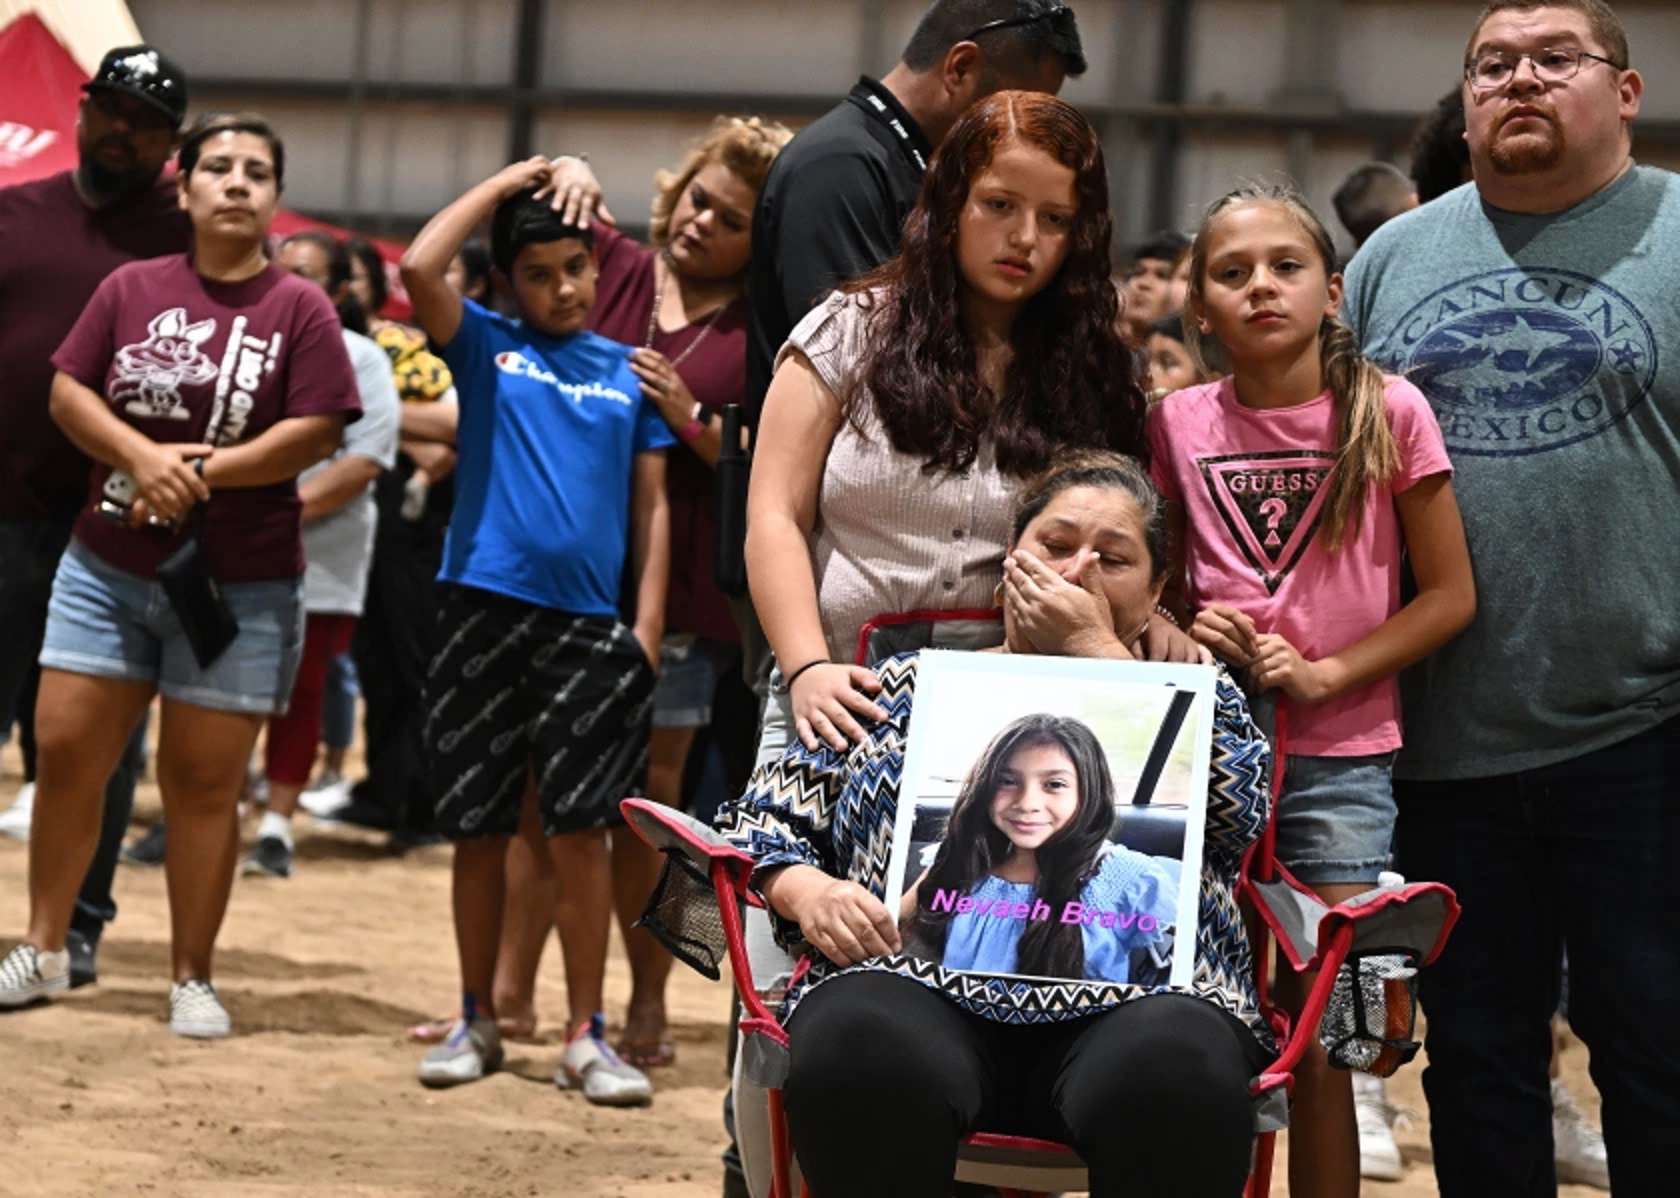 Esmeralda Bravo holds a picture of her granddaughter Naveah, one of the school shooting victims, during a vigil at the Uvalde County Fairplex, 25 May 2022. Photo: Wally Skalij / Los Angeles Times